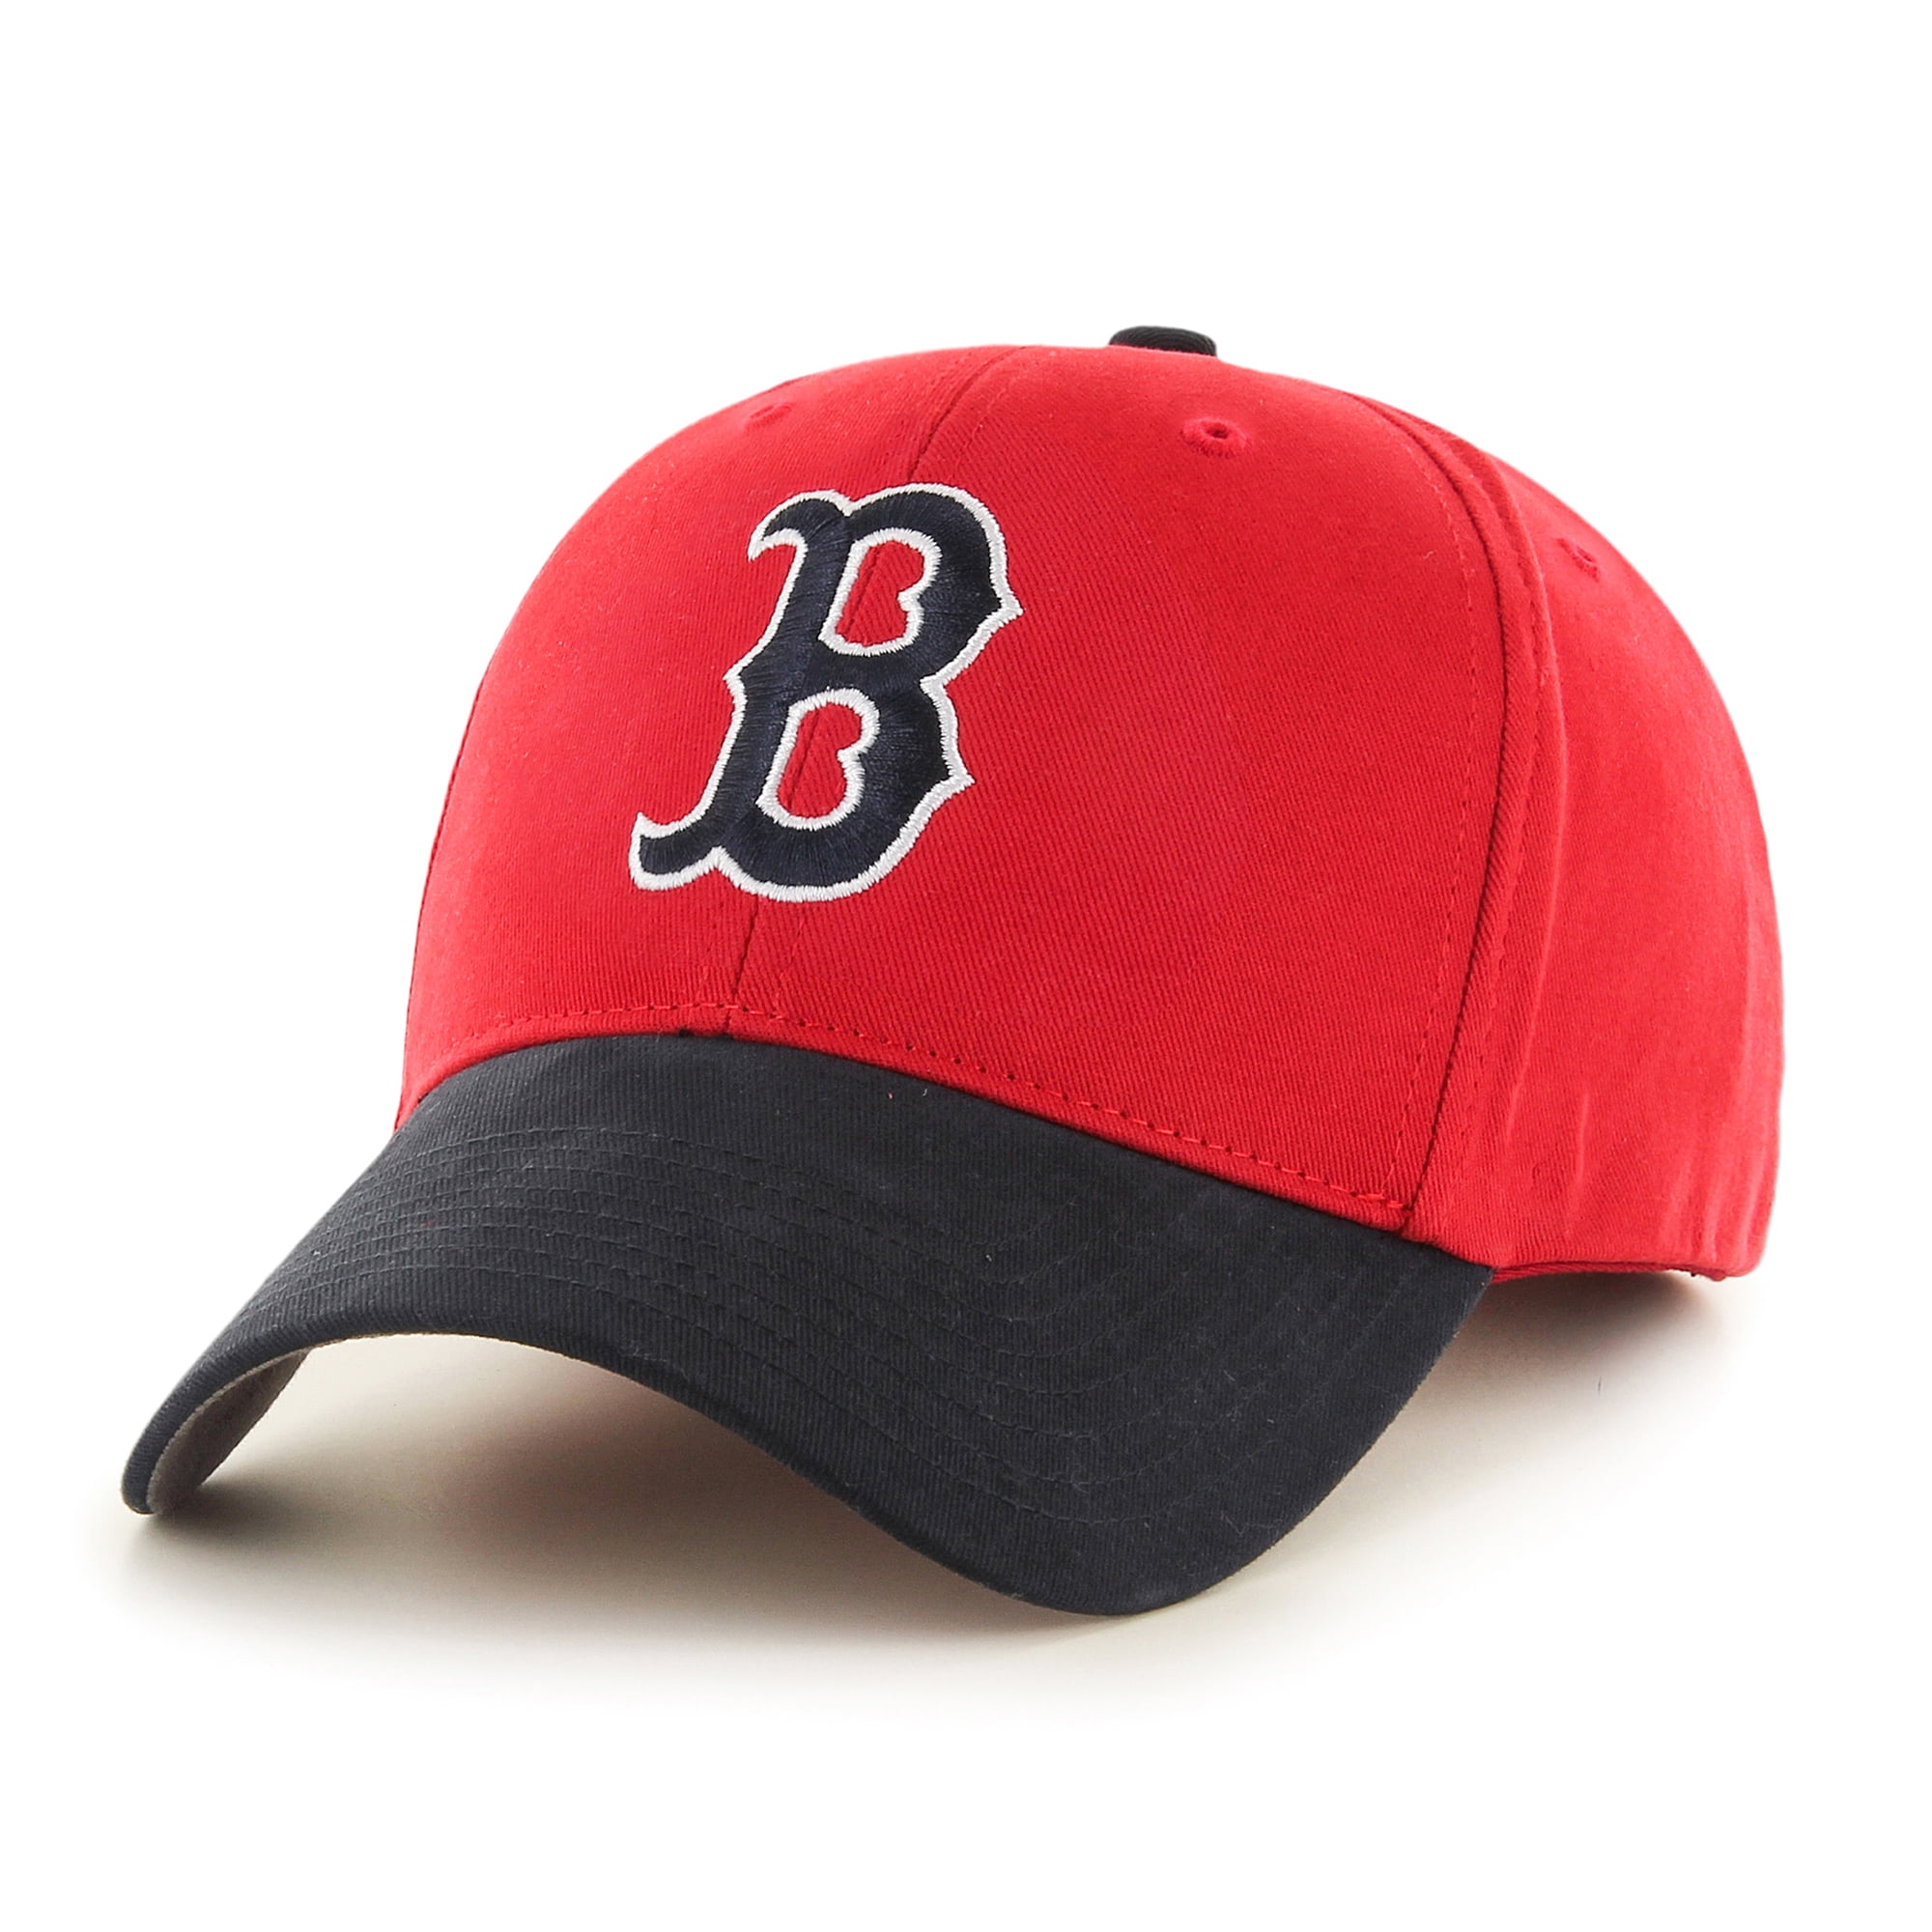 Officially Licensed MLB Men's Red Sox 2021 Fitted Hat